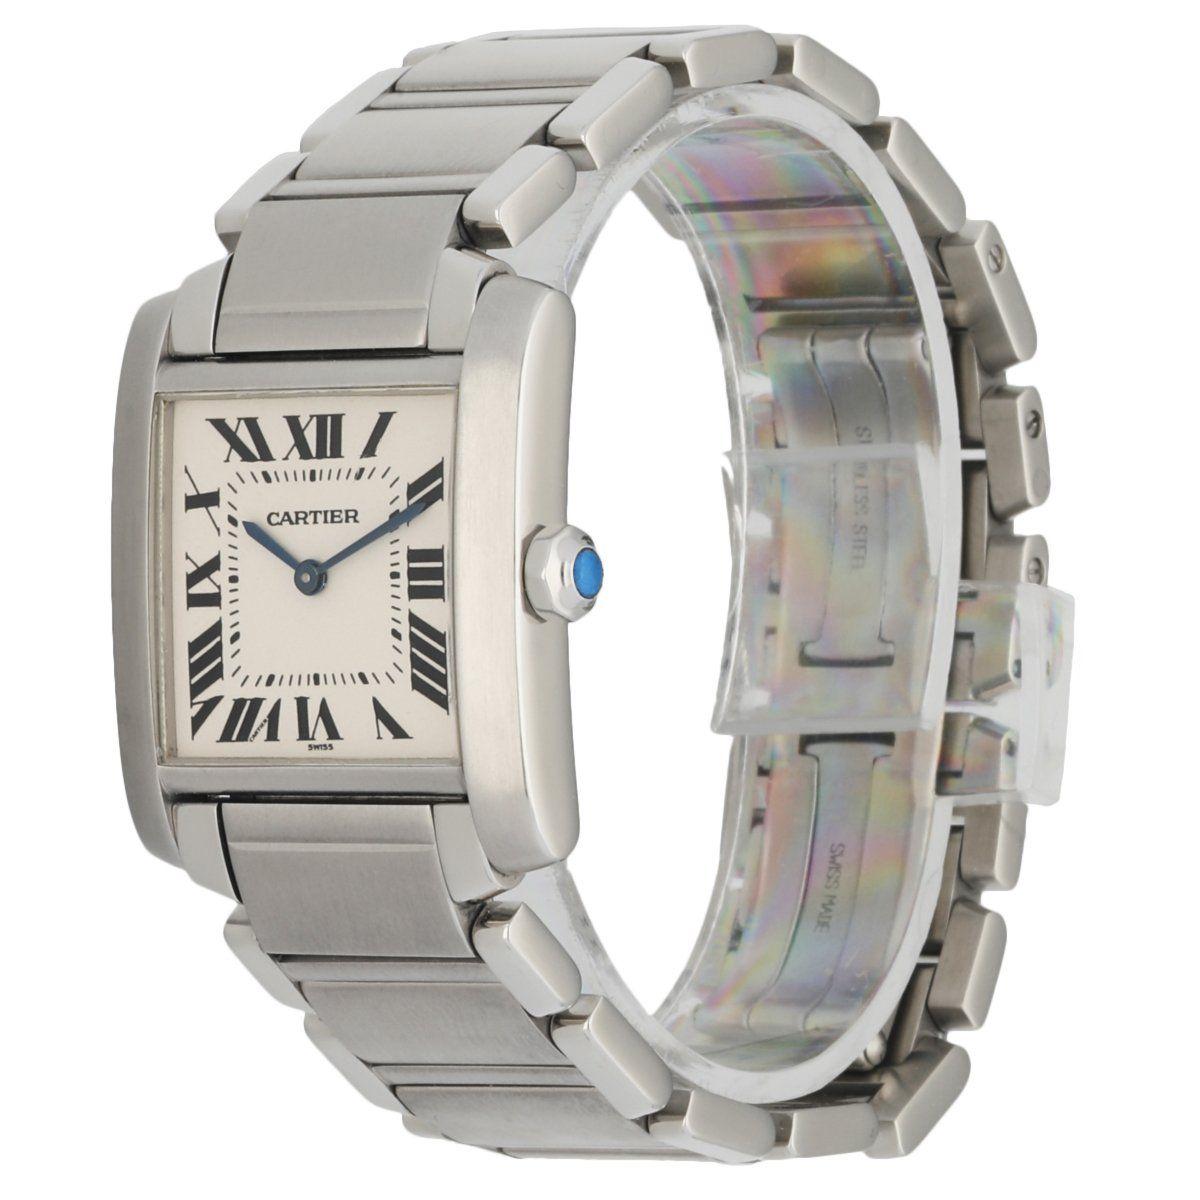 Cartier Tank FrancaiseÂ 2301 Ladies Watch.Â 25mm stainless steel case with smooth bezel. Off White dial with Blue steel hands and black Roman numeral hour markers. Minute markers on the inner dial.Â Stainless steel bracelet with stainless steel